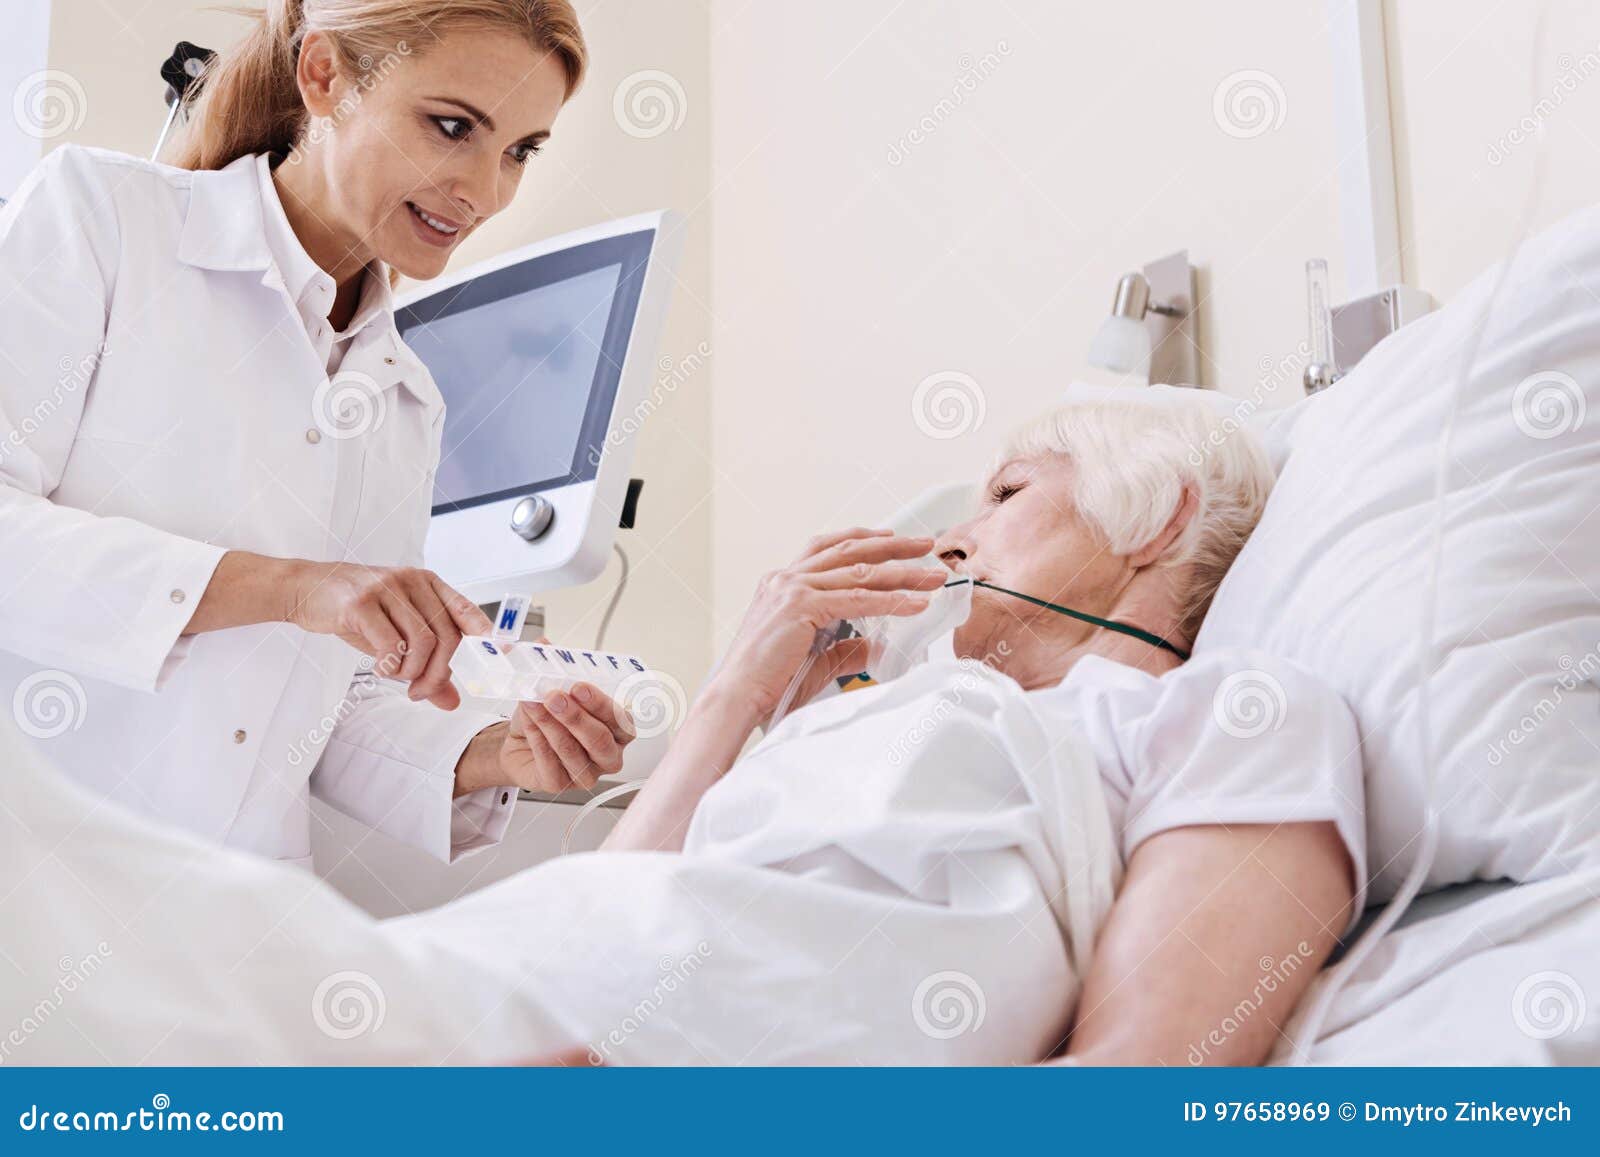 Brilliant Sweet Doctor Giving Her Patient New Instructions Stock Image 